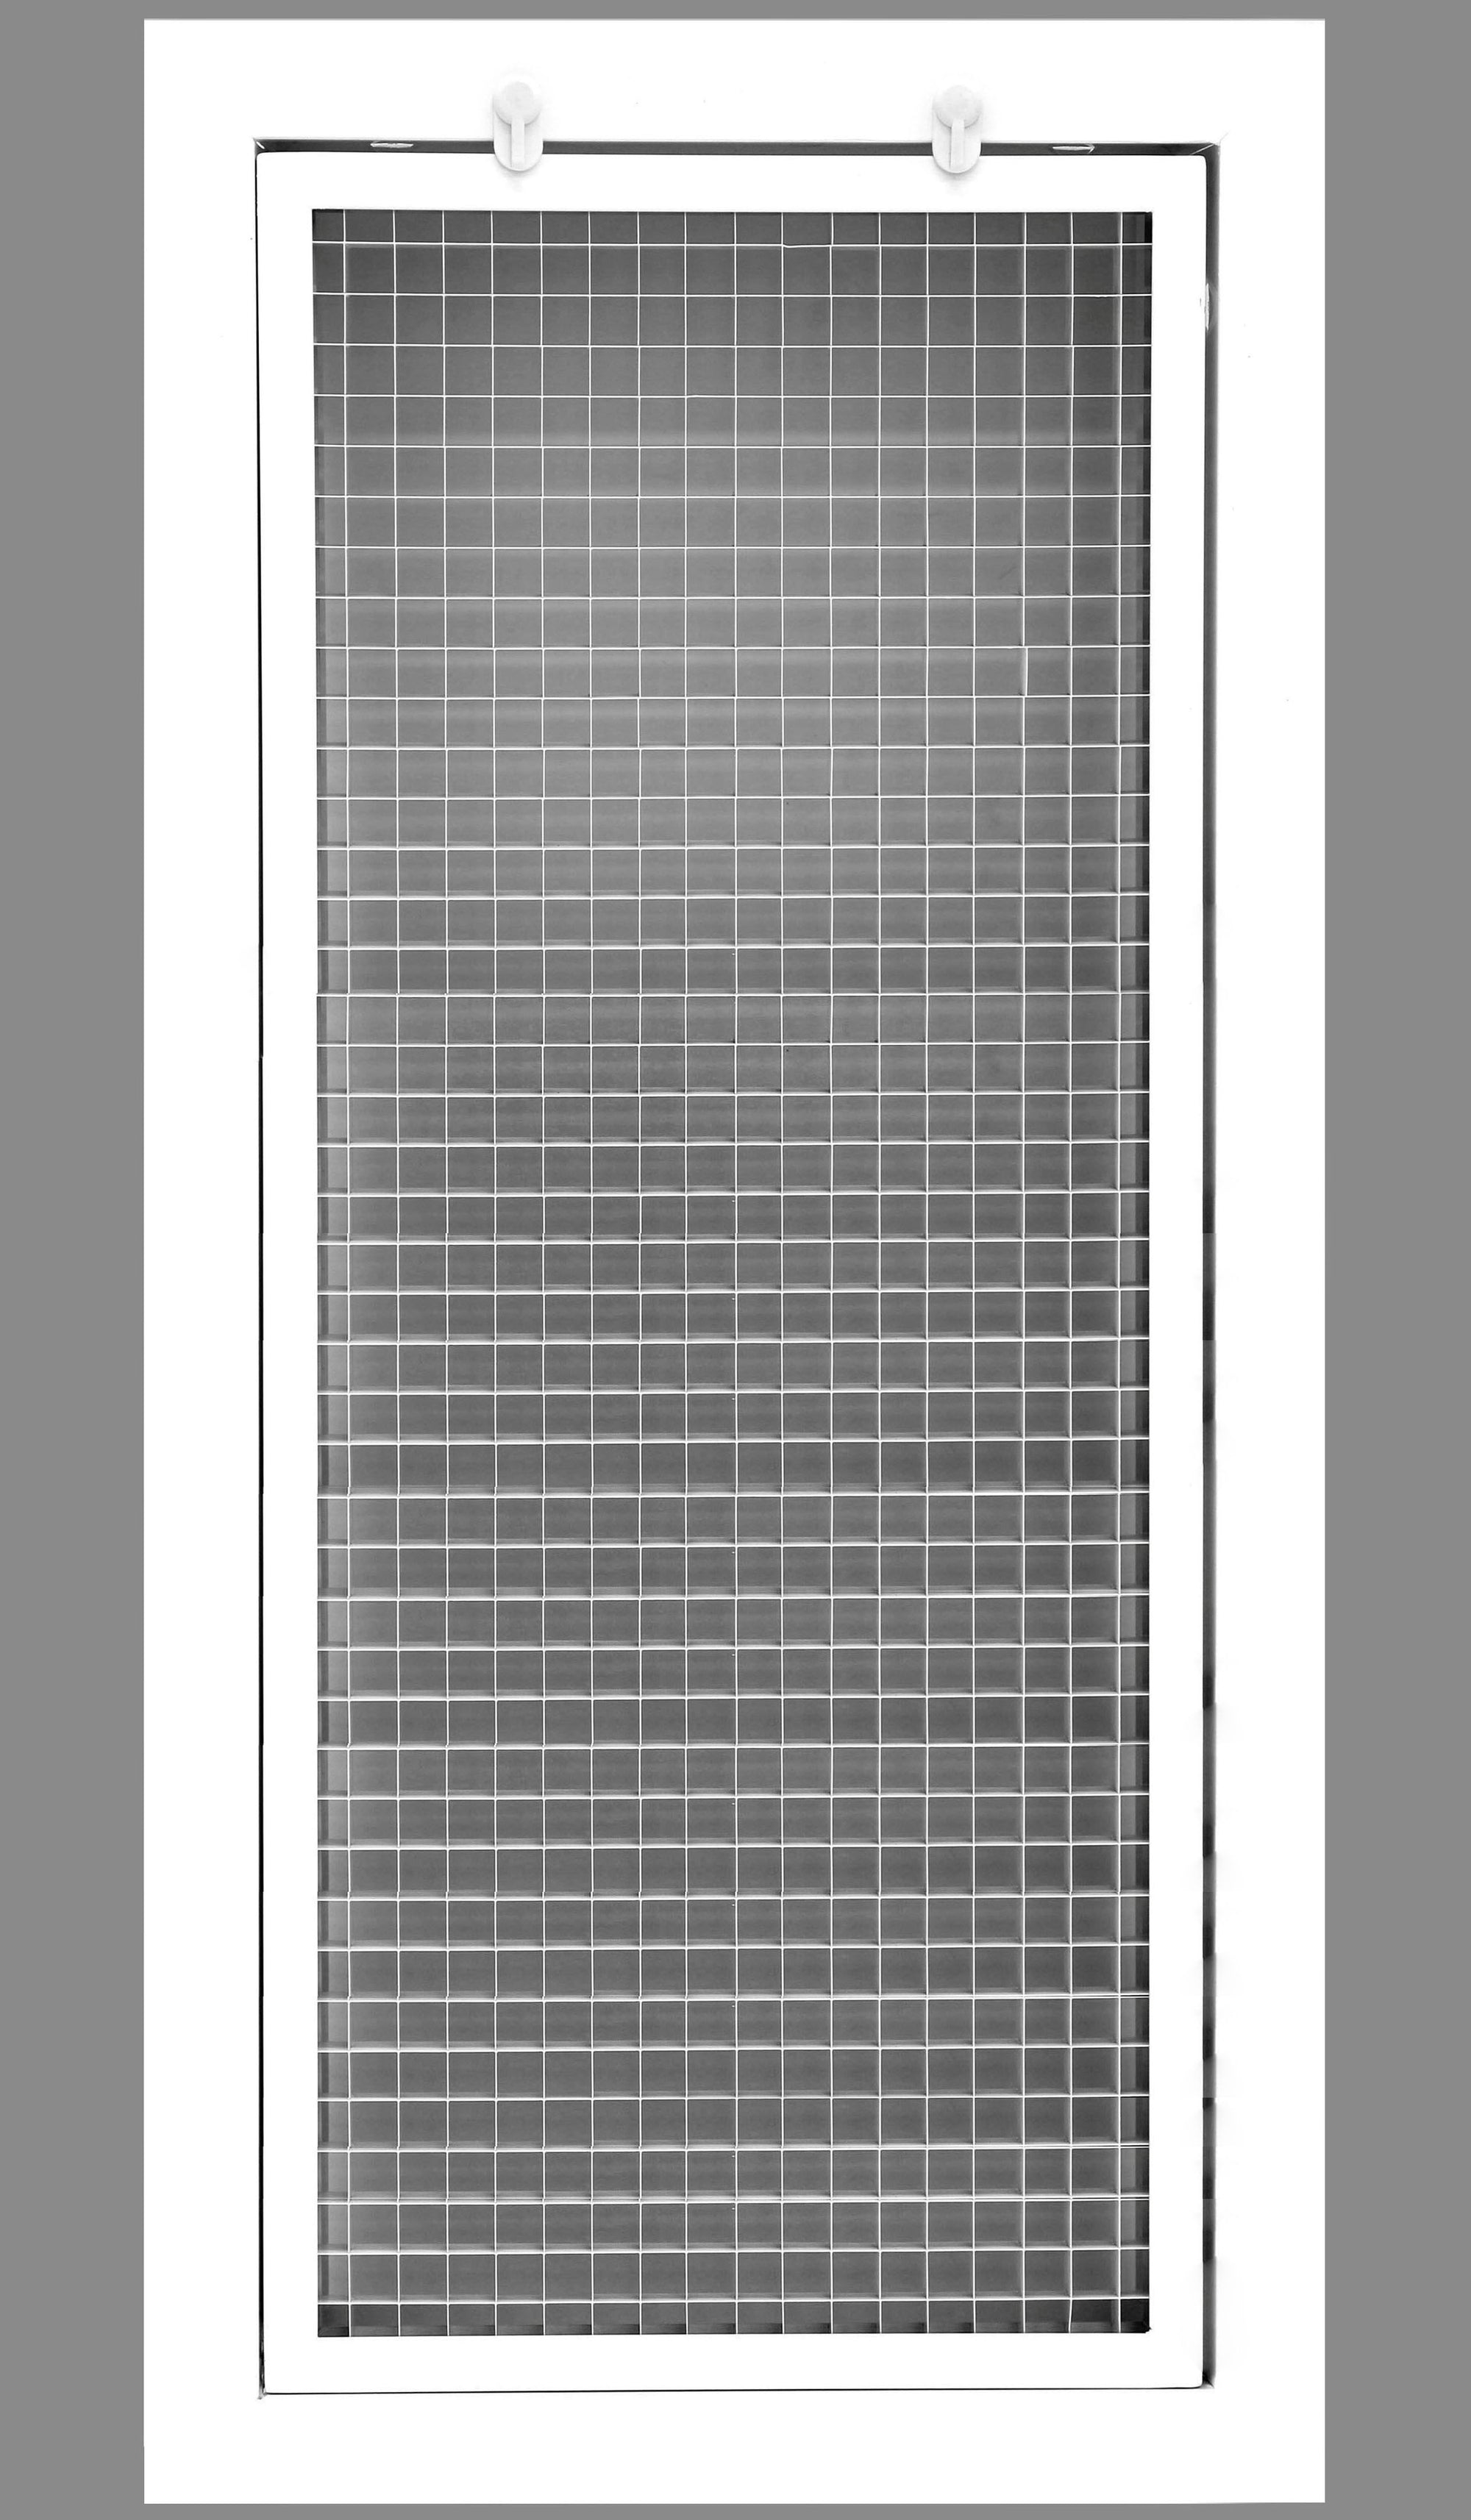 6" x 28" Cube Core Eggcrate Return Air Filter Grille for 1" Filter